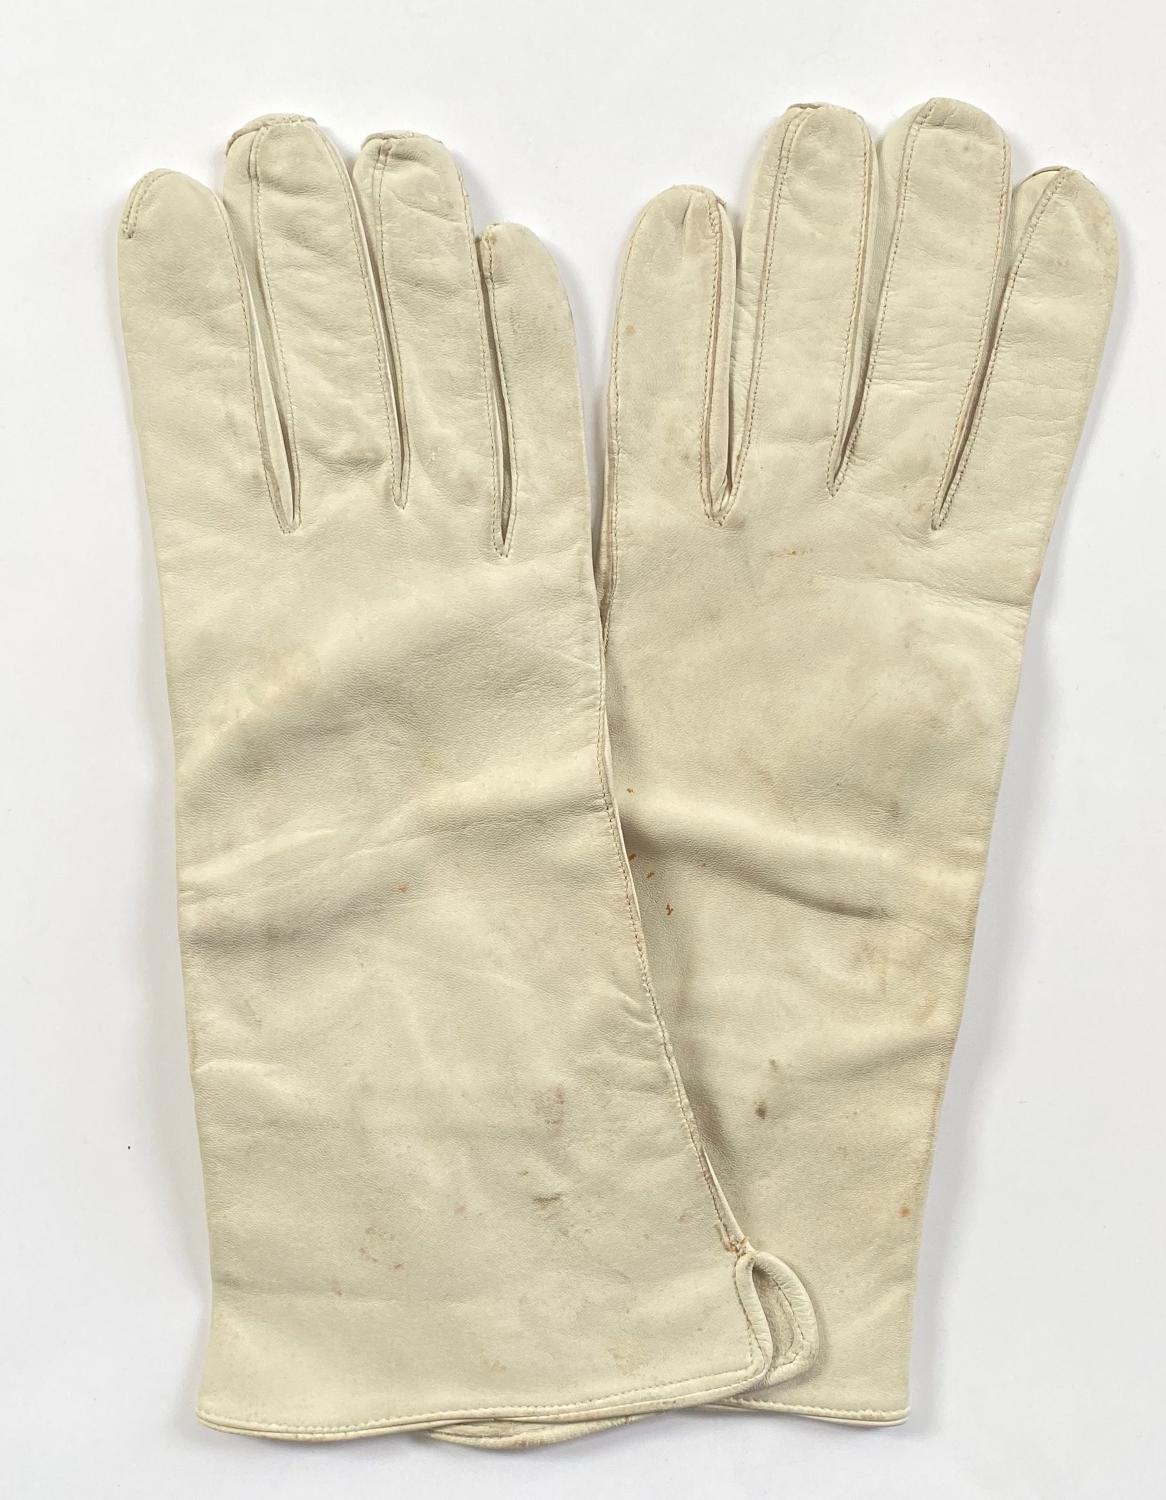 Cold War Period RAF Aircrew Flying Gloves.